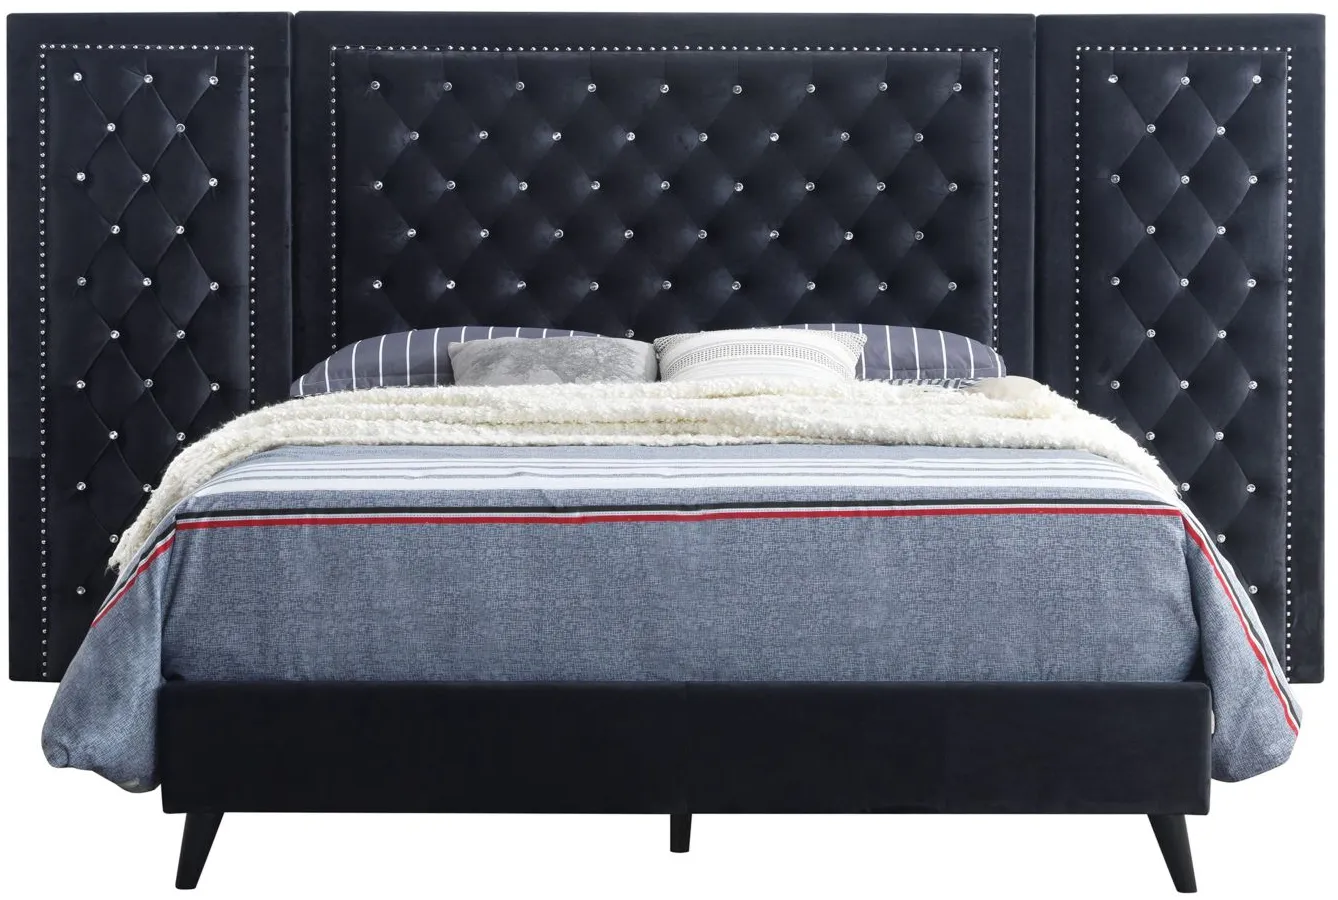 Alba Upholstered Panel Bed with Upholstered Side Panels in Black by Glory Furniture